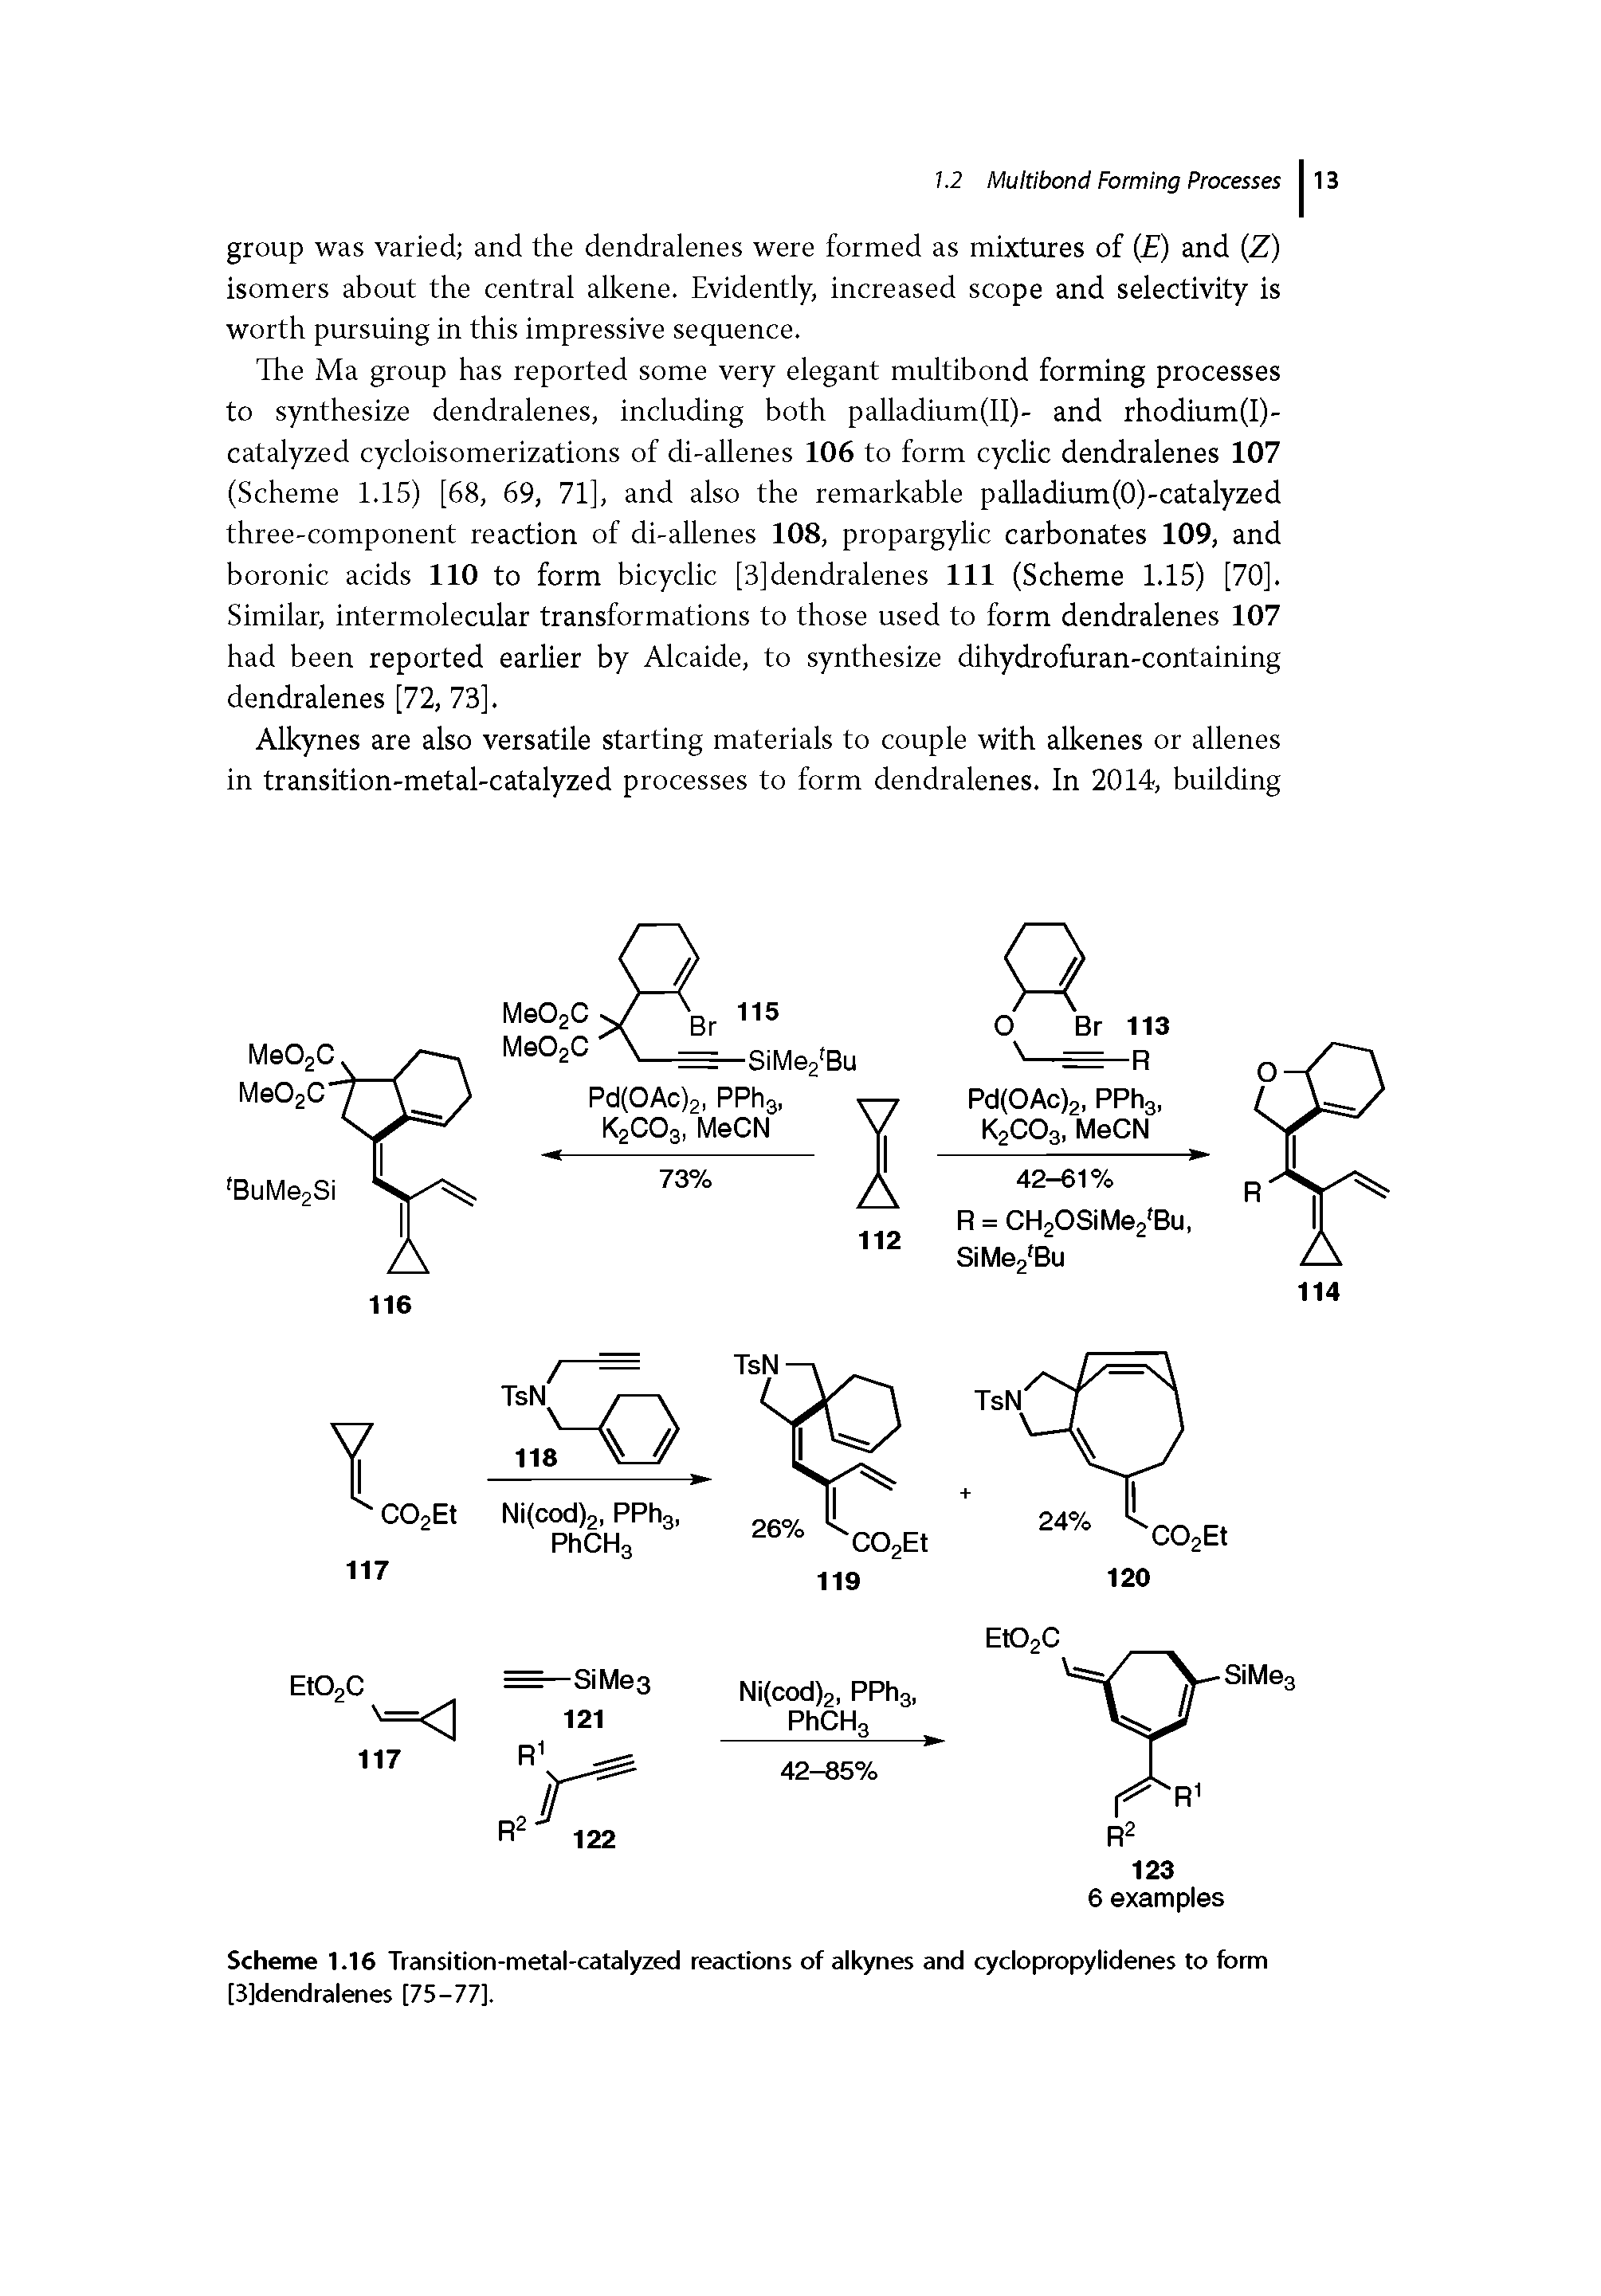 Scheme 1.16 Transition-metal-catalyzed reactions of alkynes and cyclopropylidenes to form [3]dendralenes [75-77].